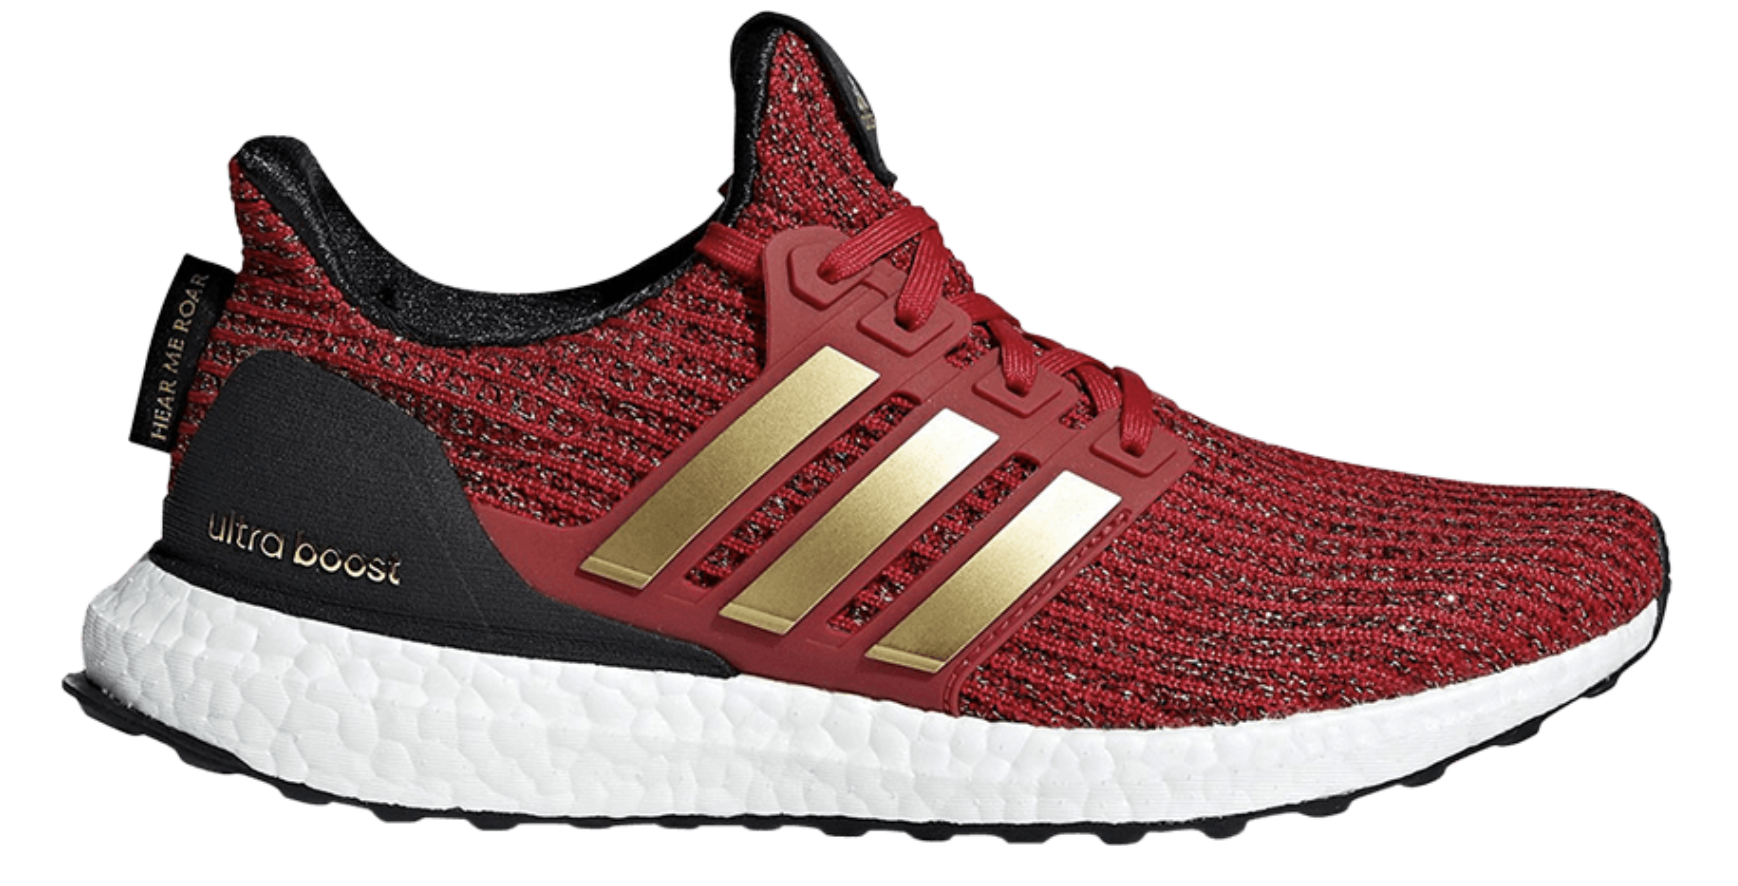 adidas ultra boost 4.0 game of thrones house lannister